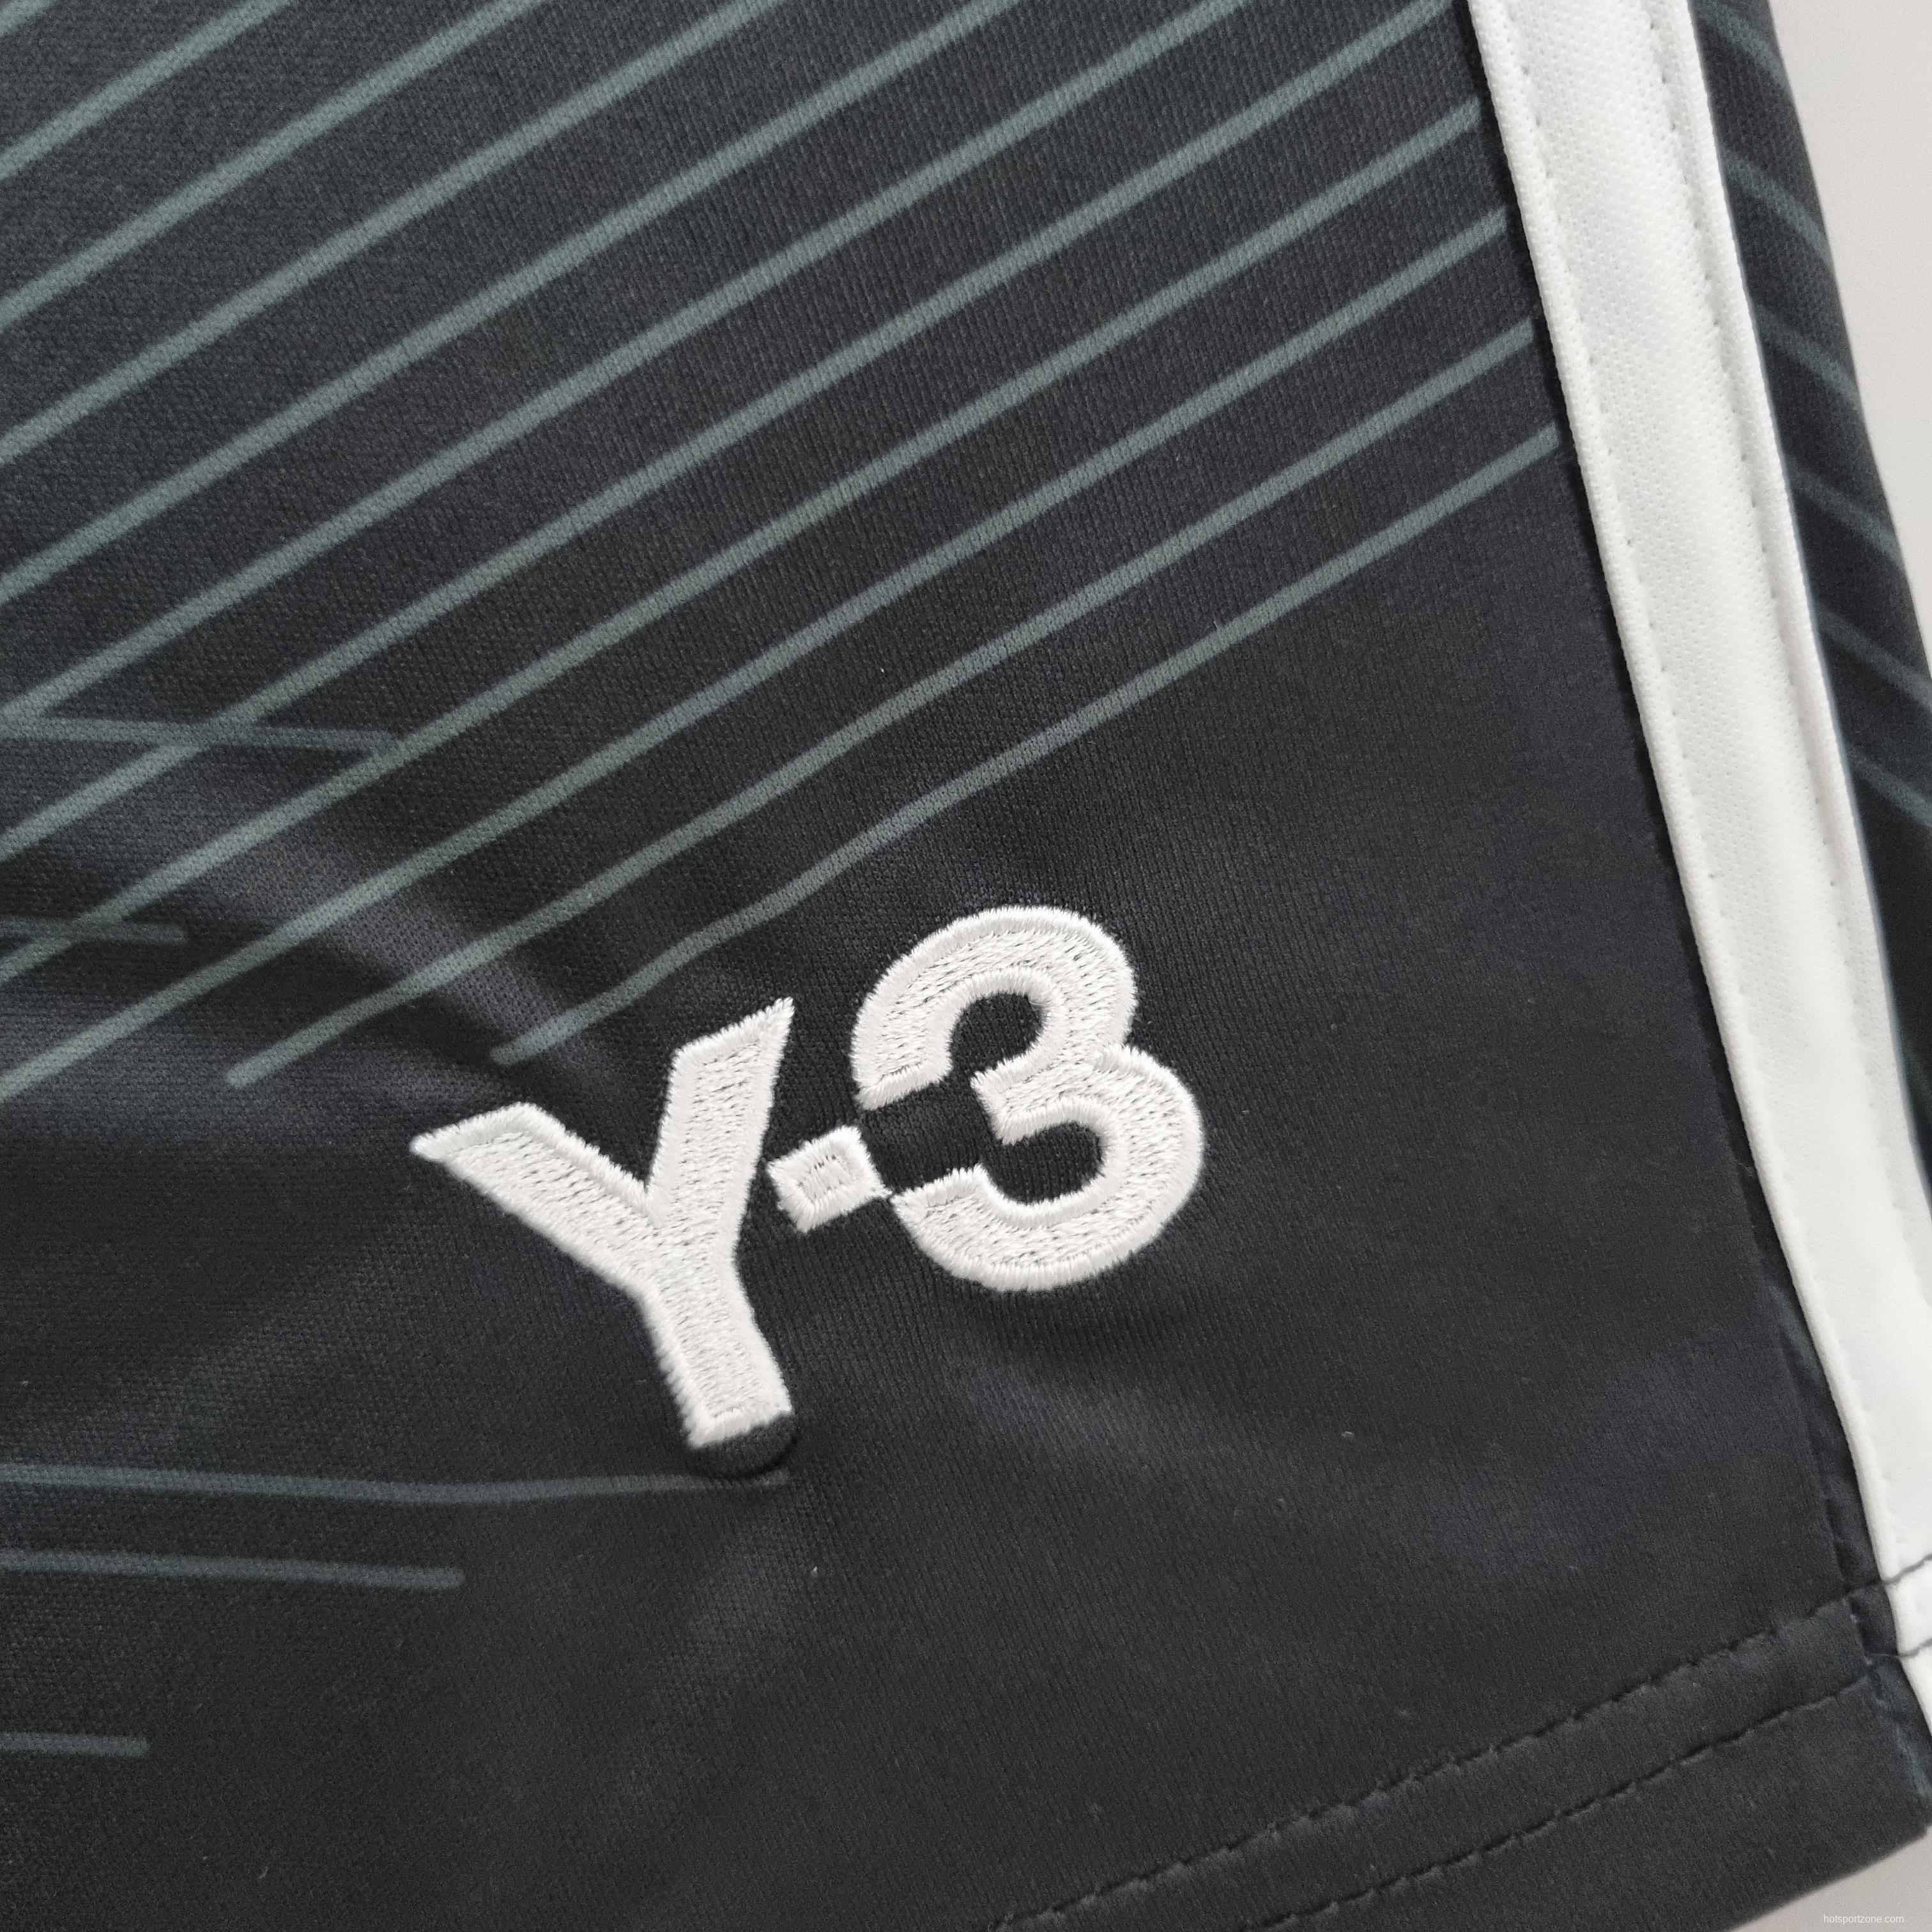 2022 Real Madrid Y3 Edition shorts Black Soccer Jersey